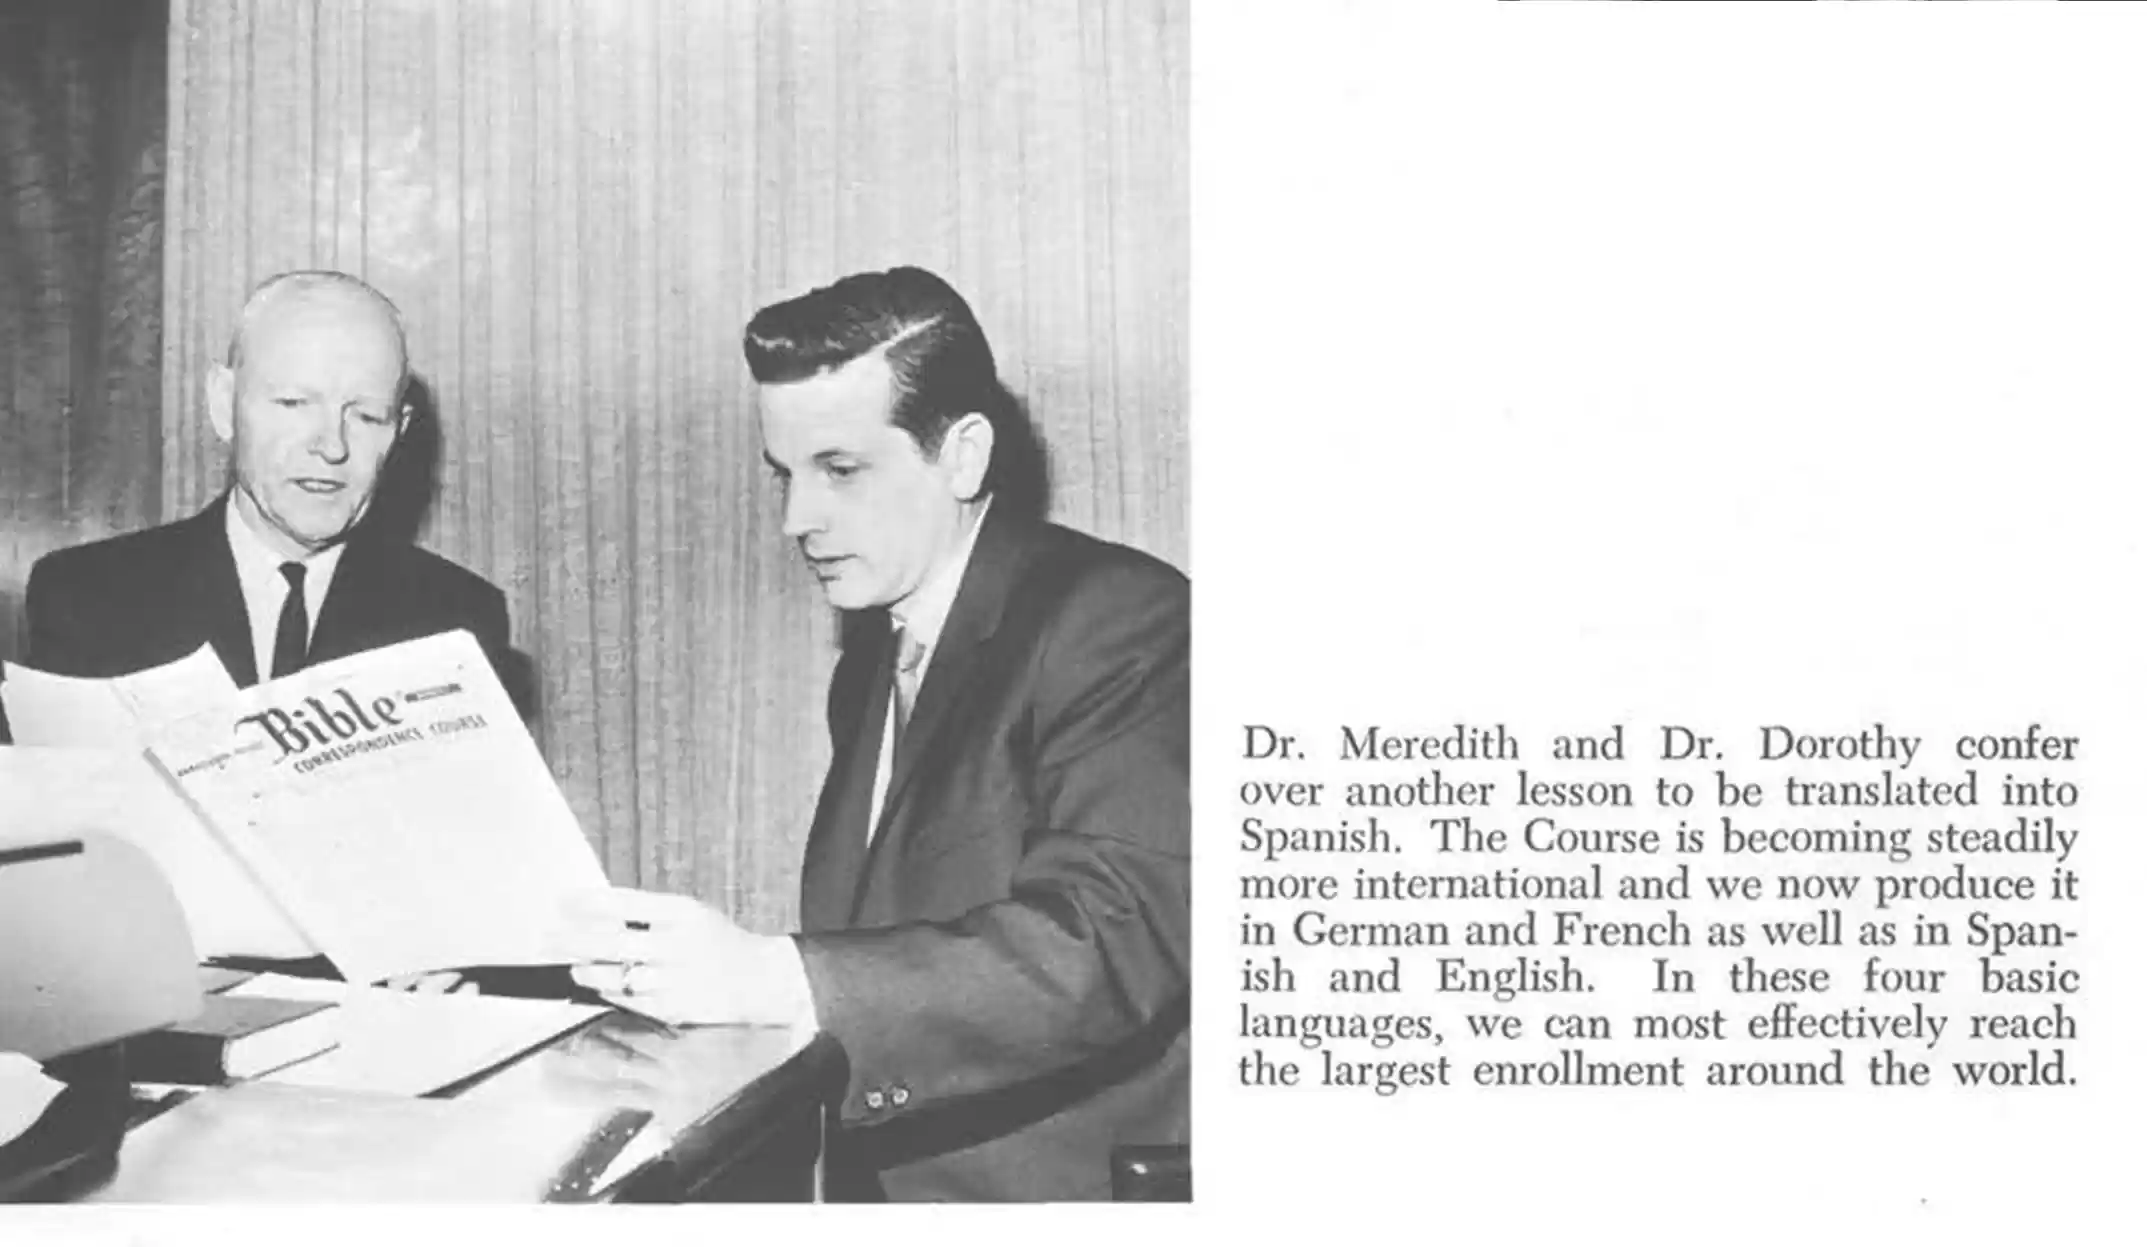 Charles Dorothy conferring with C Paul Meredith